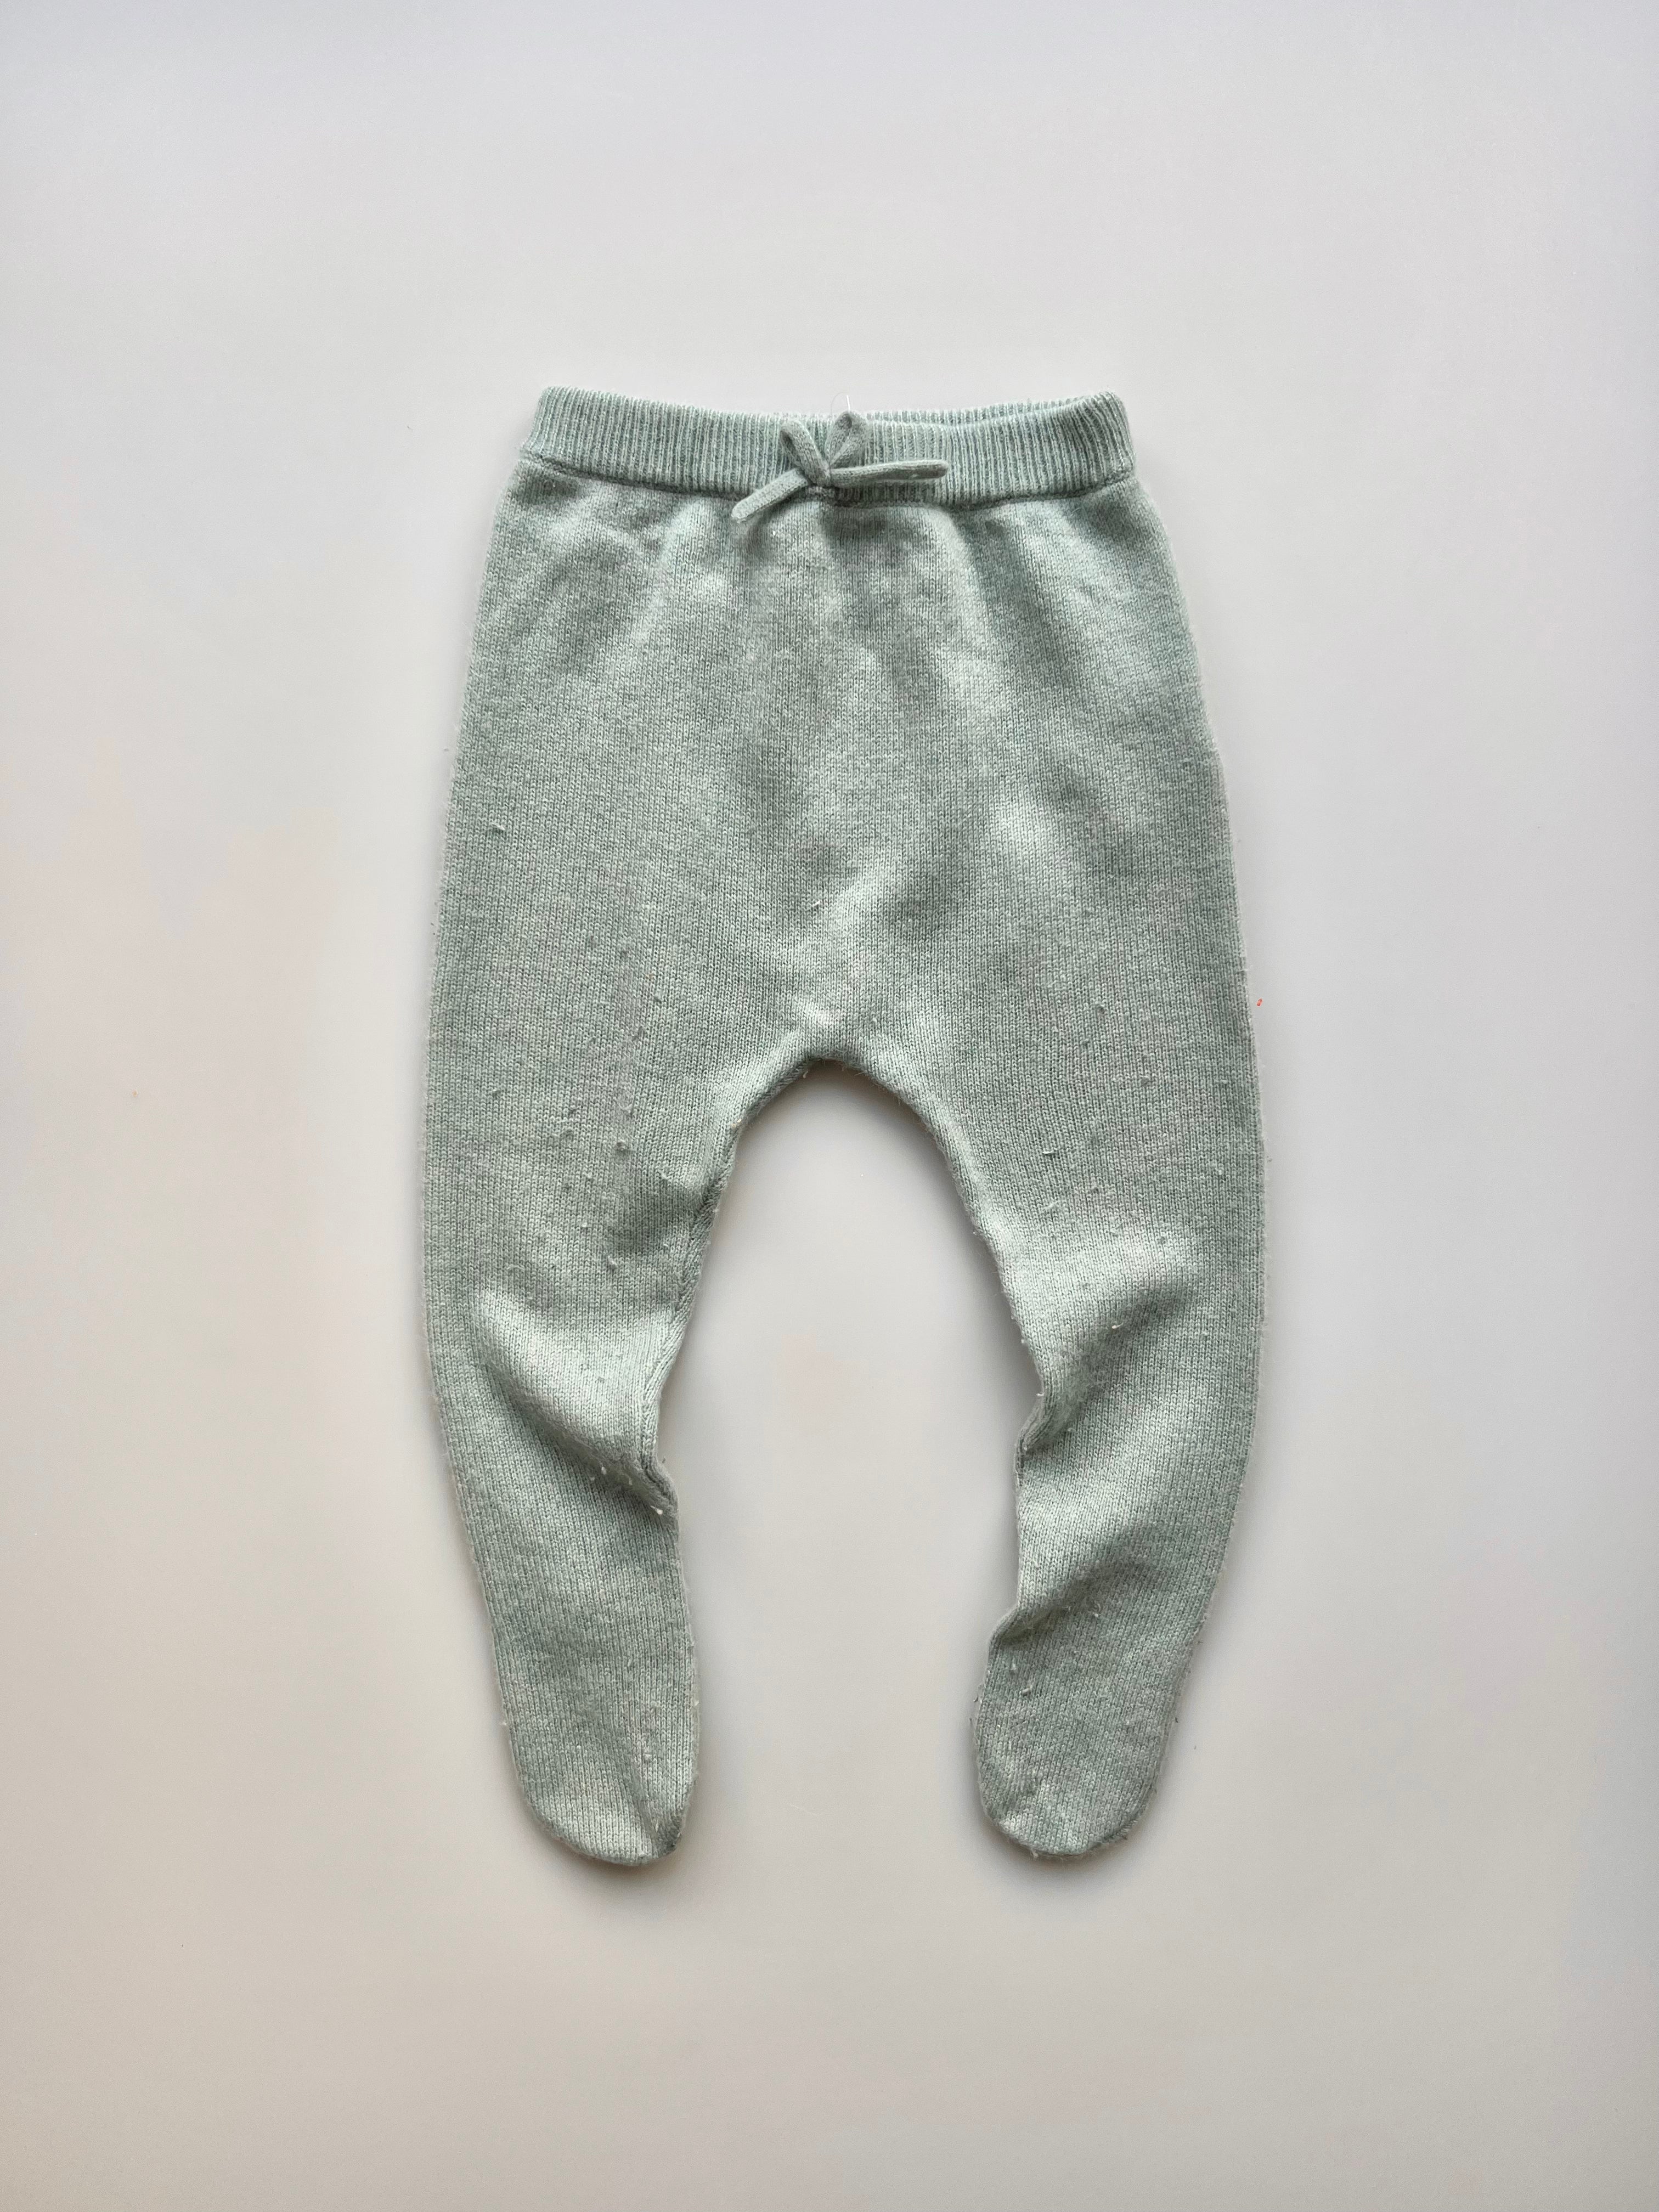 Zara 100% Cashmere Teal Footed Leggings 3-6 Months